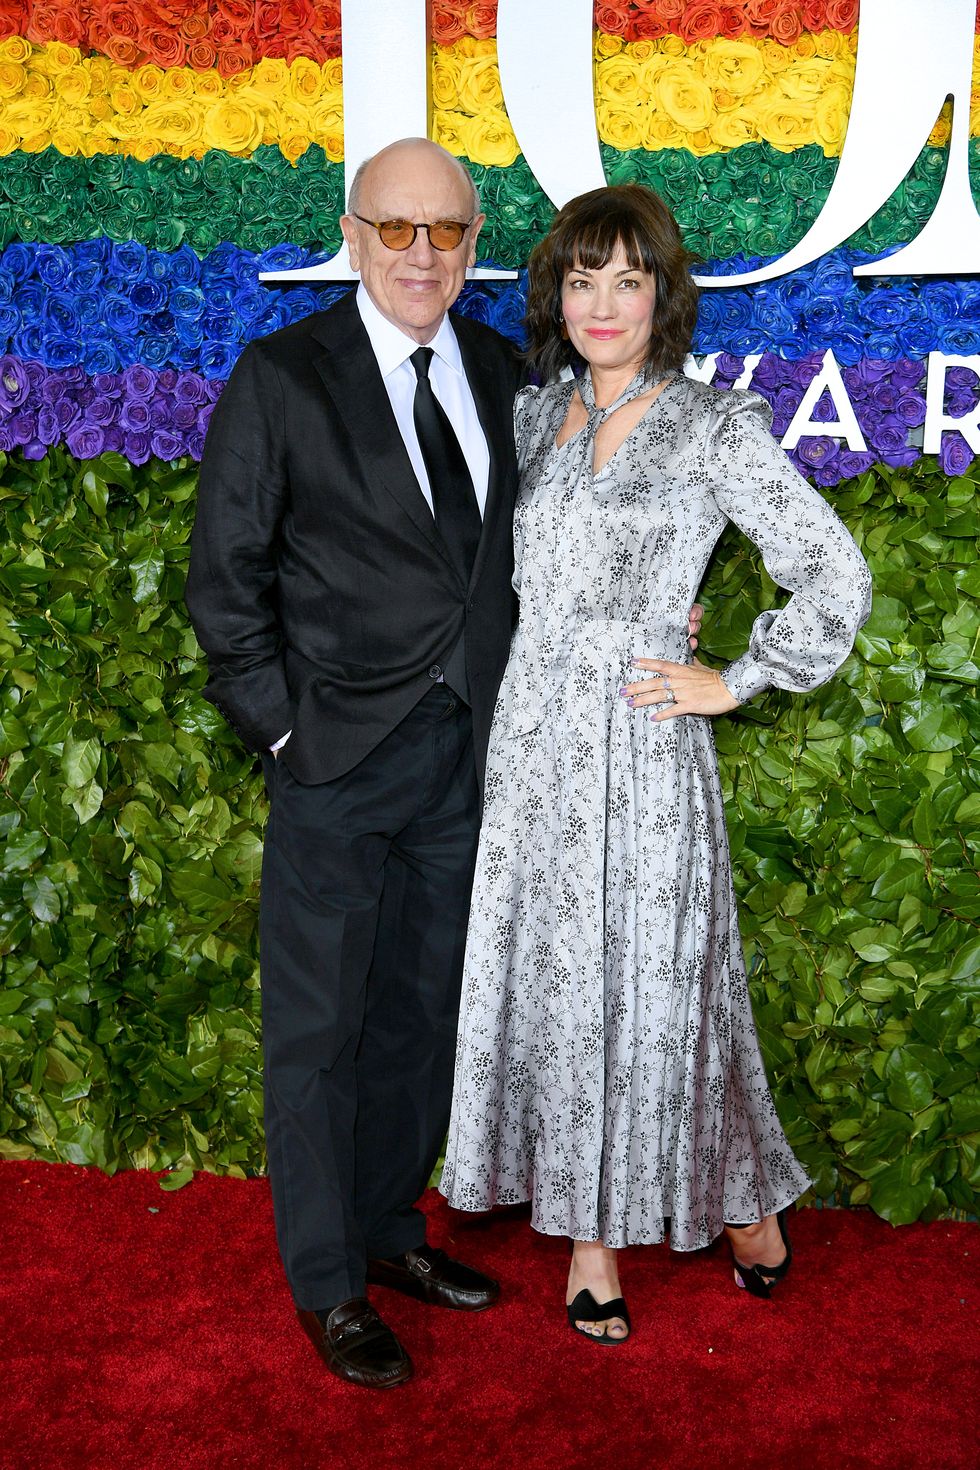 Mart Crowley and Natalie Wood's daughter Natasha Gregson Wagner at the 73rd Annual Tony Awards at Radio City Music Hall on June 9, 2019, in New York City